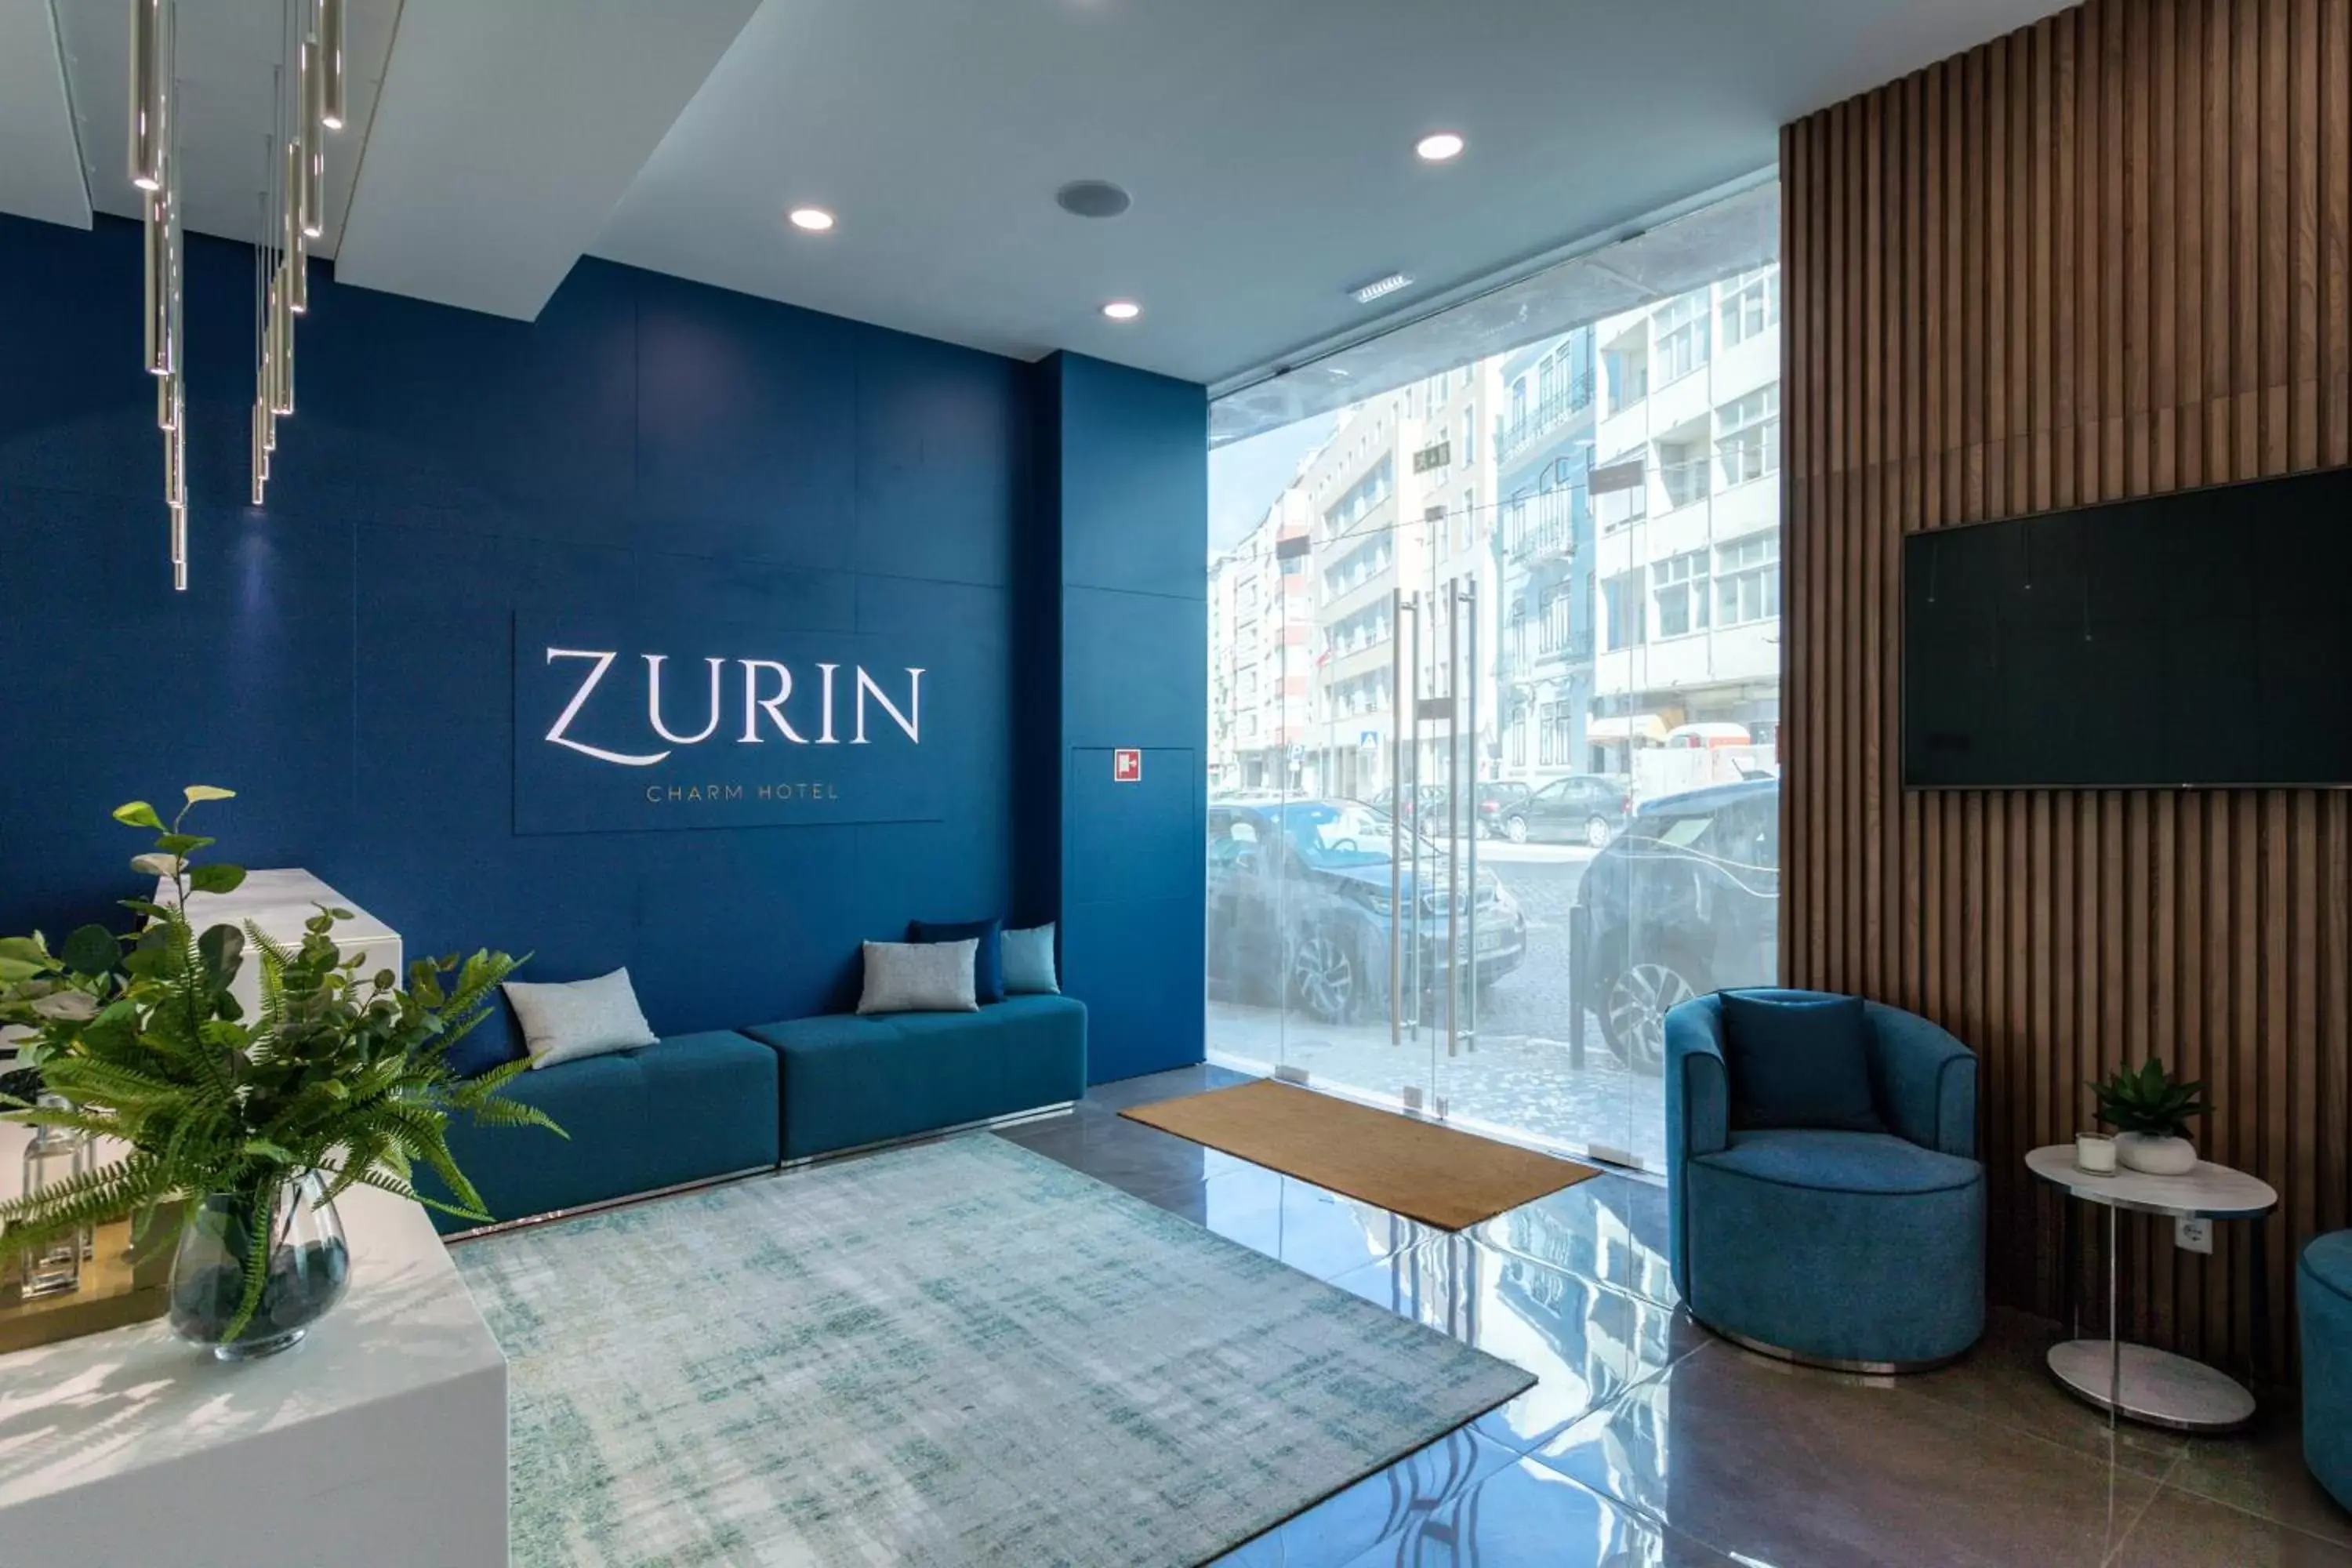 Property building in Zurin Charm Hotel